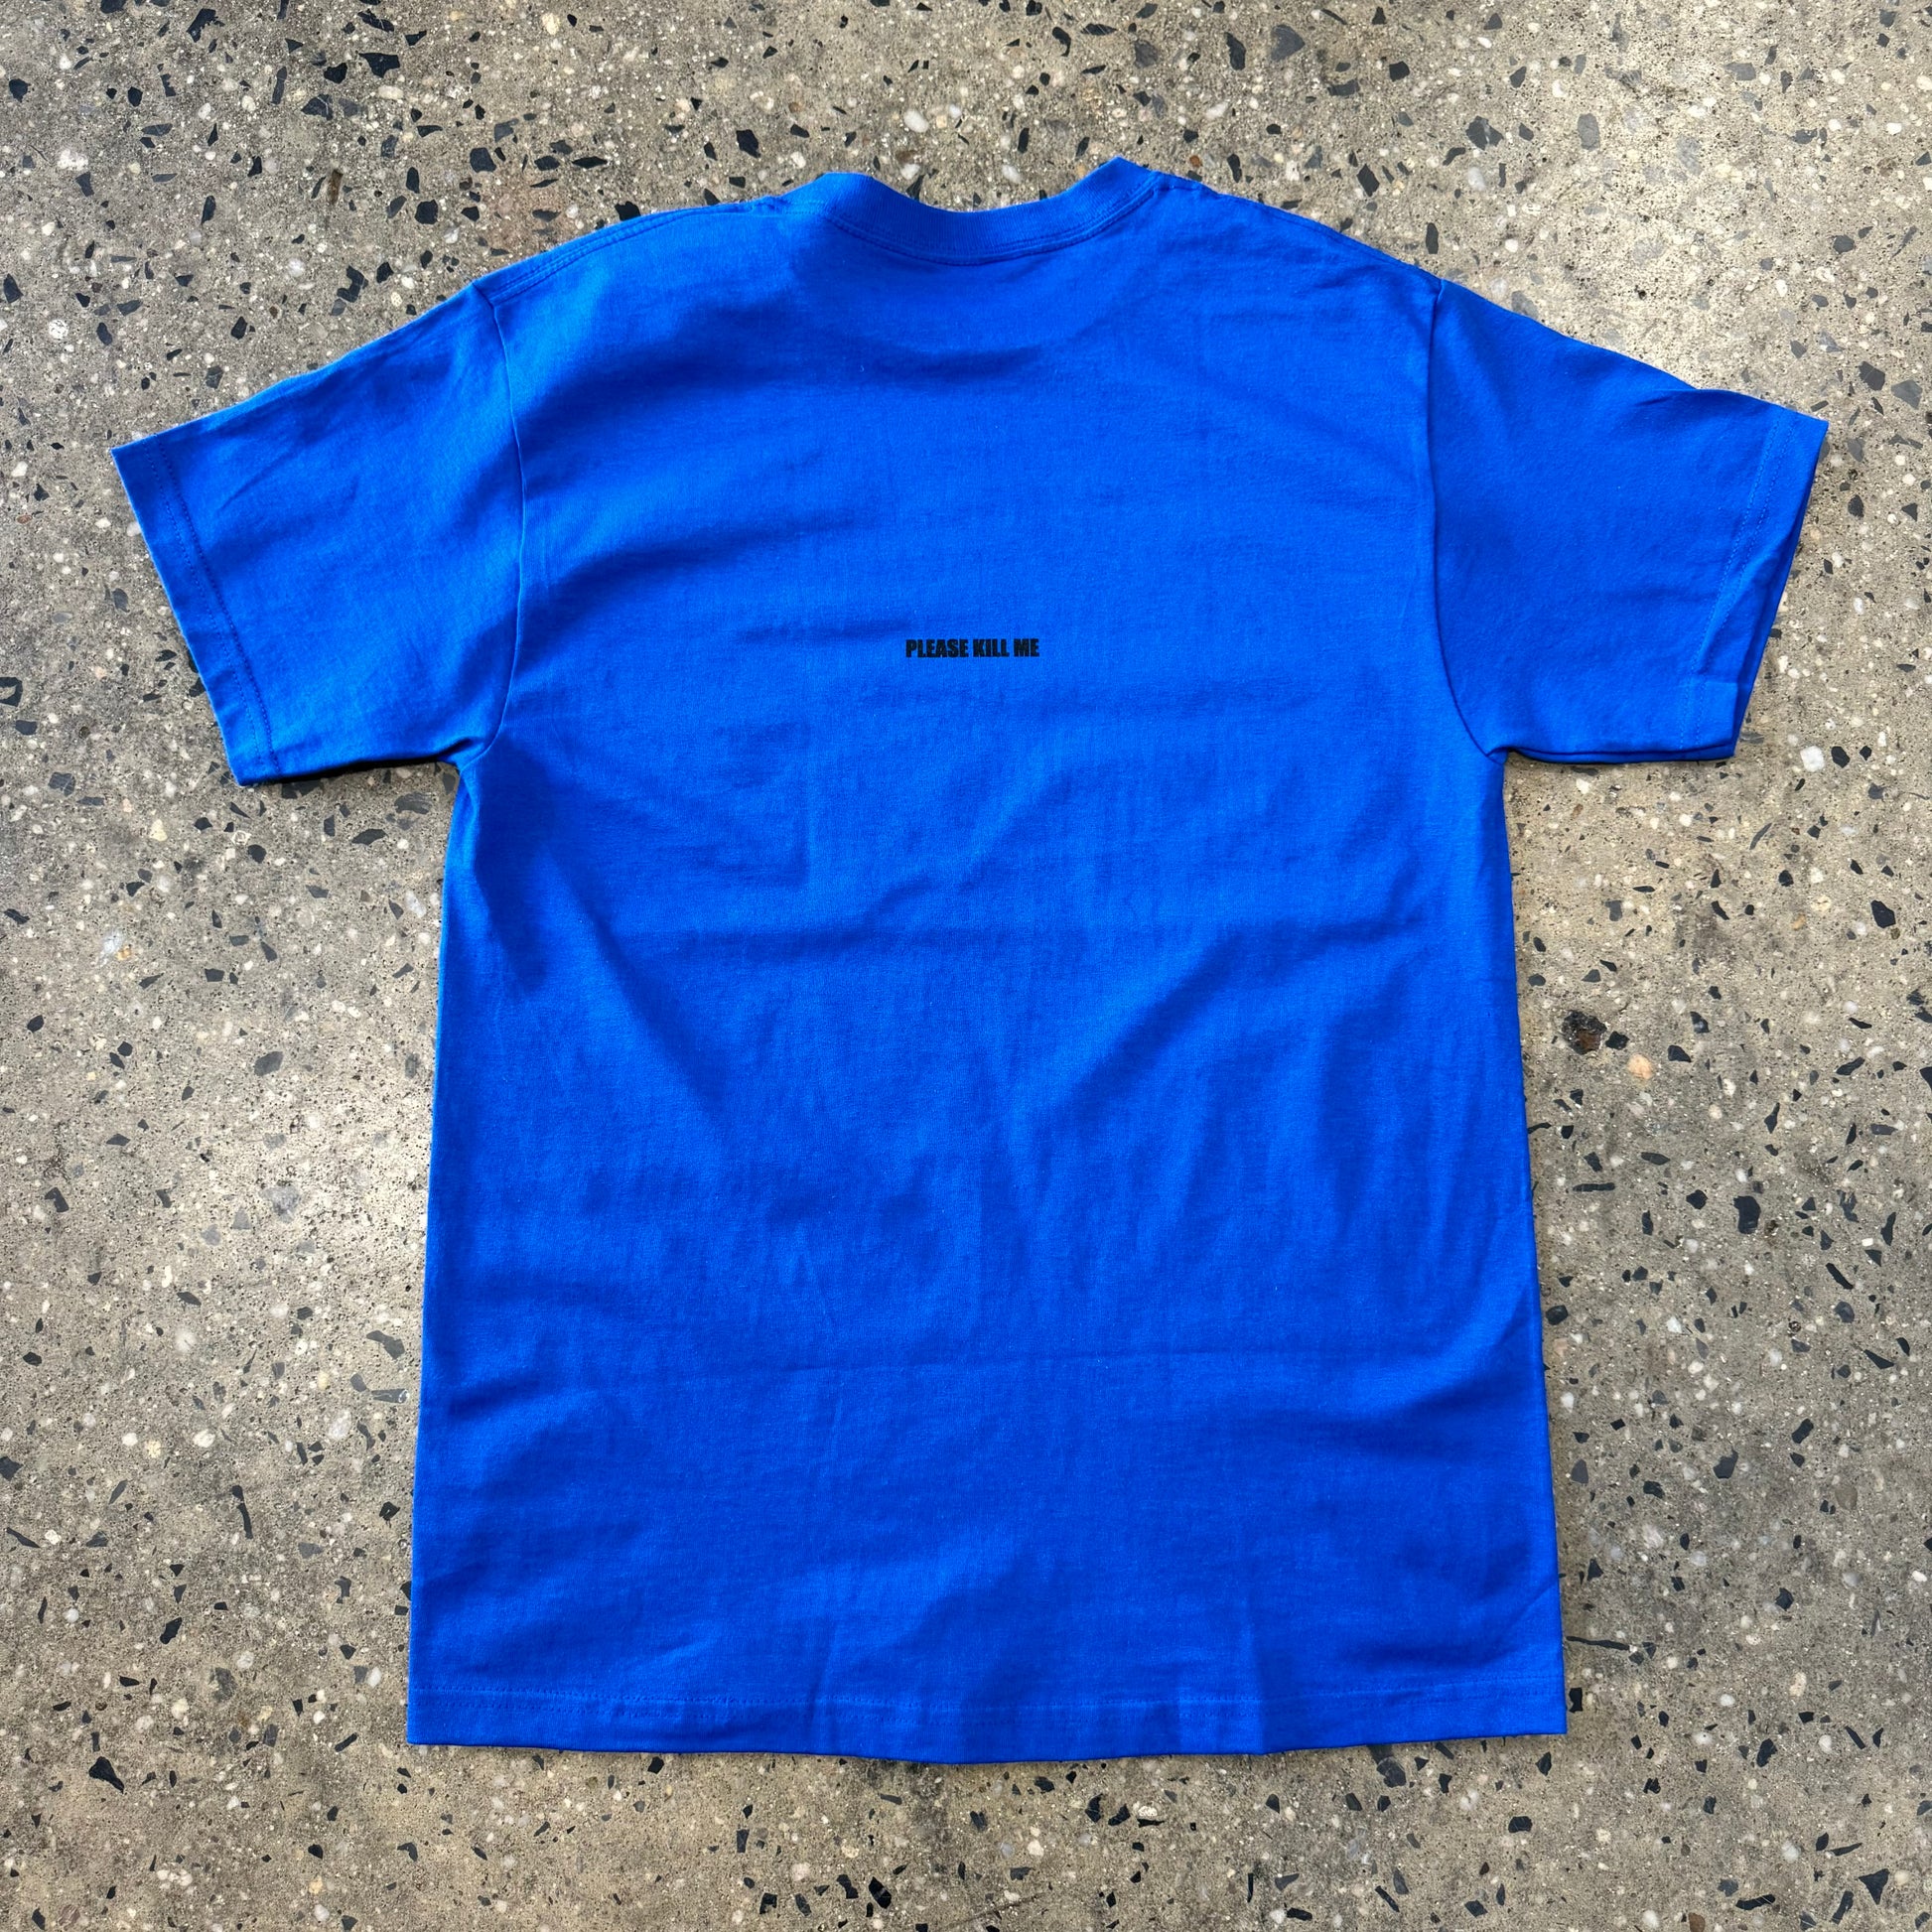 back view of blue T-shirt with logo